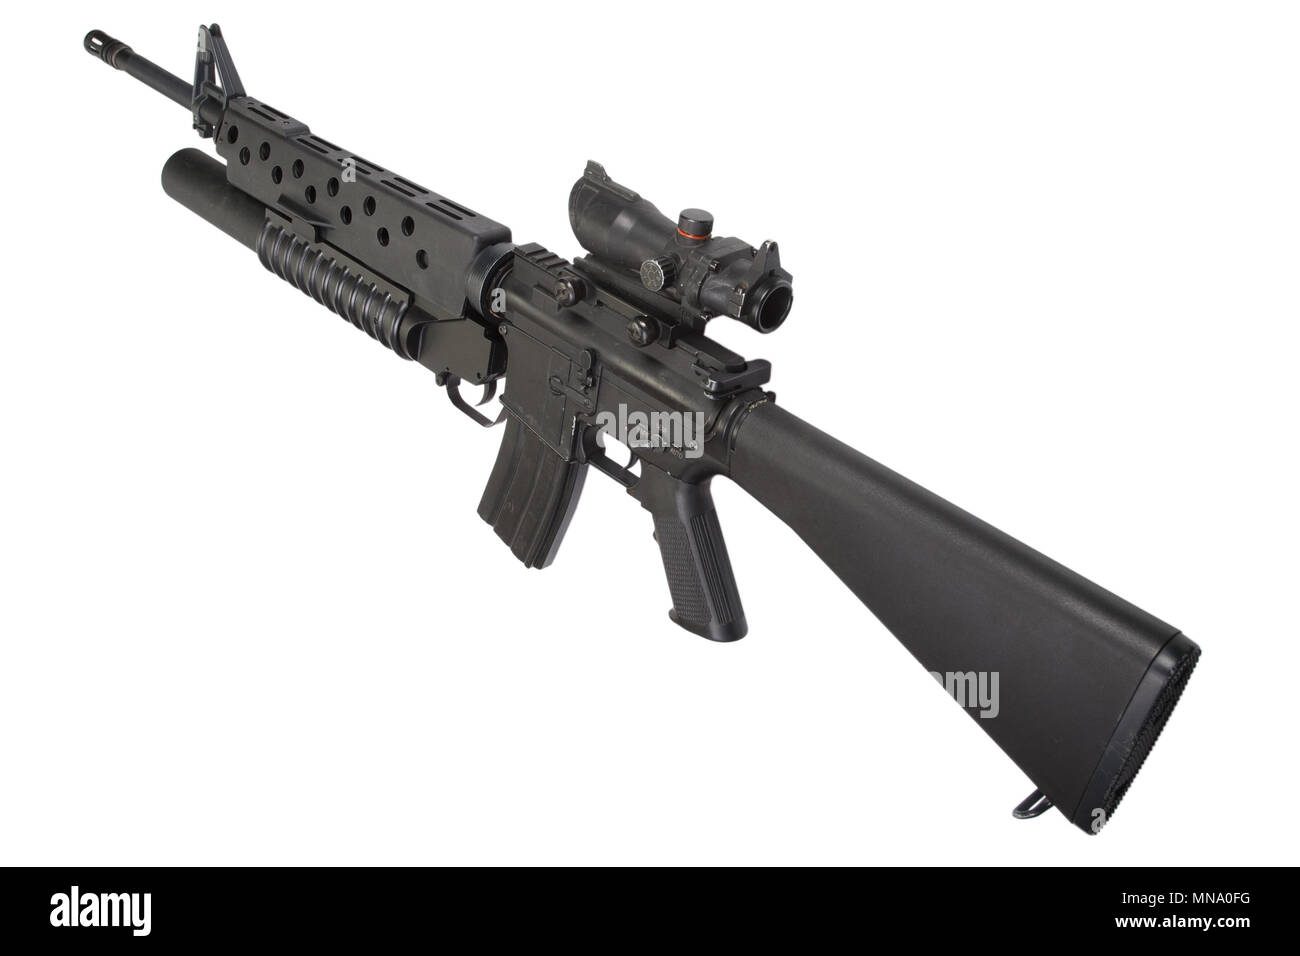 M16 rifle with an M203 grenade launcher Stock Photo